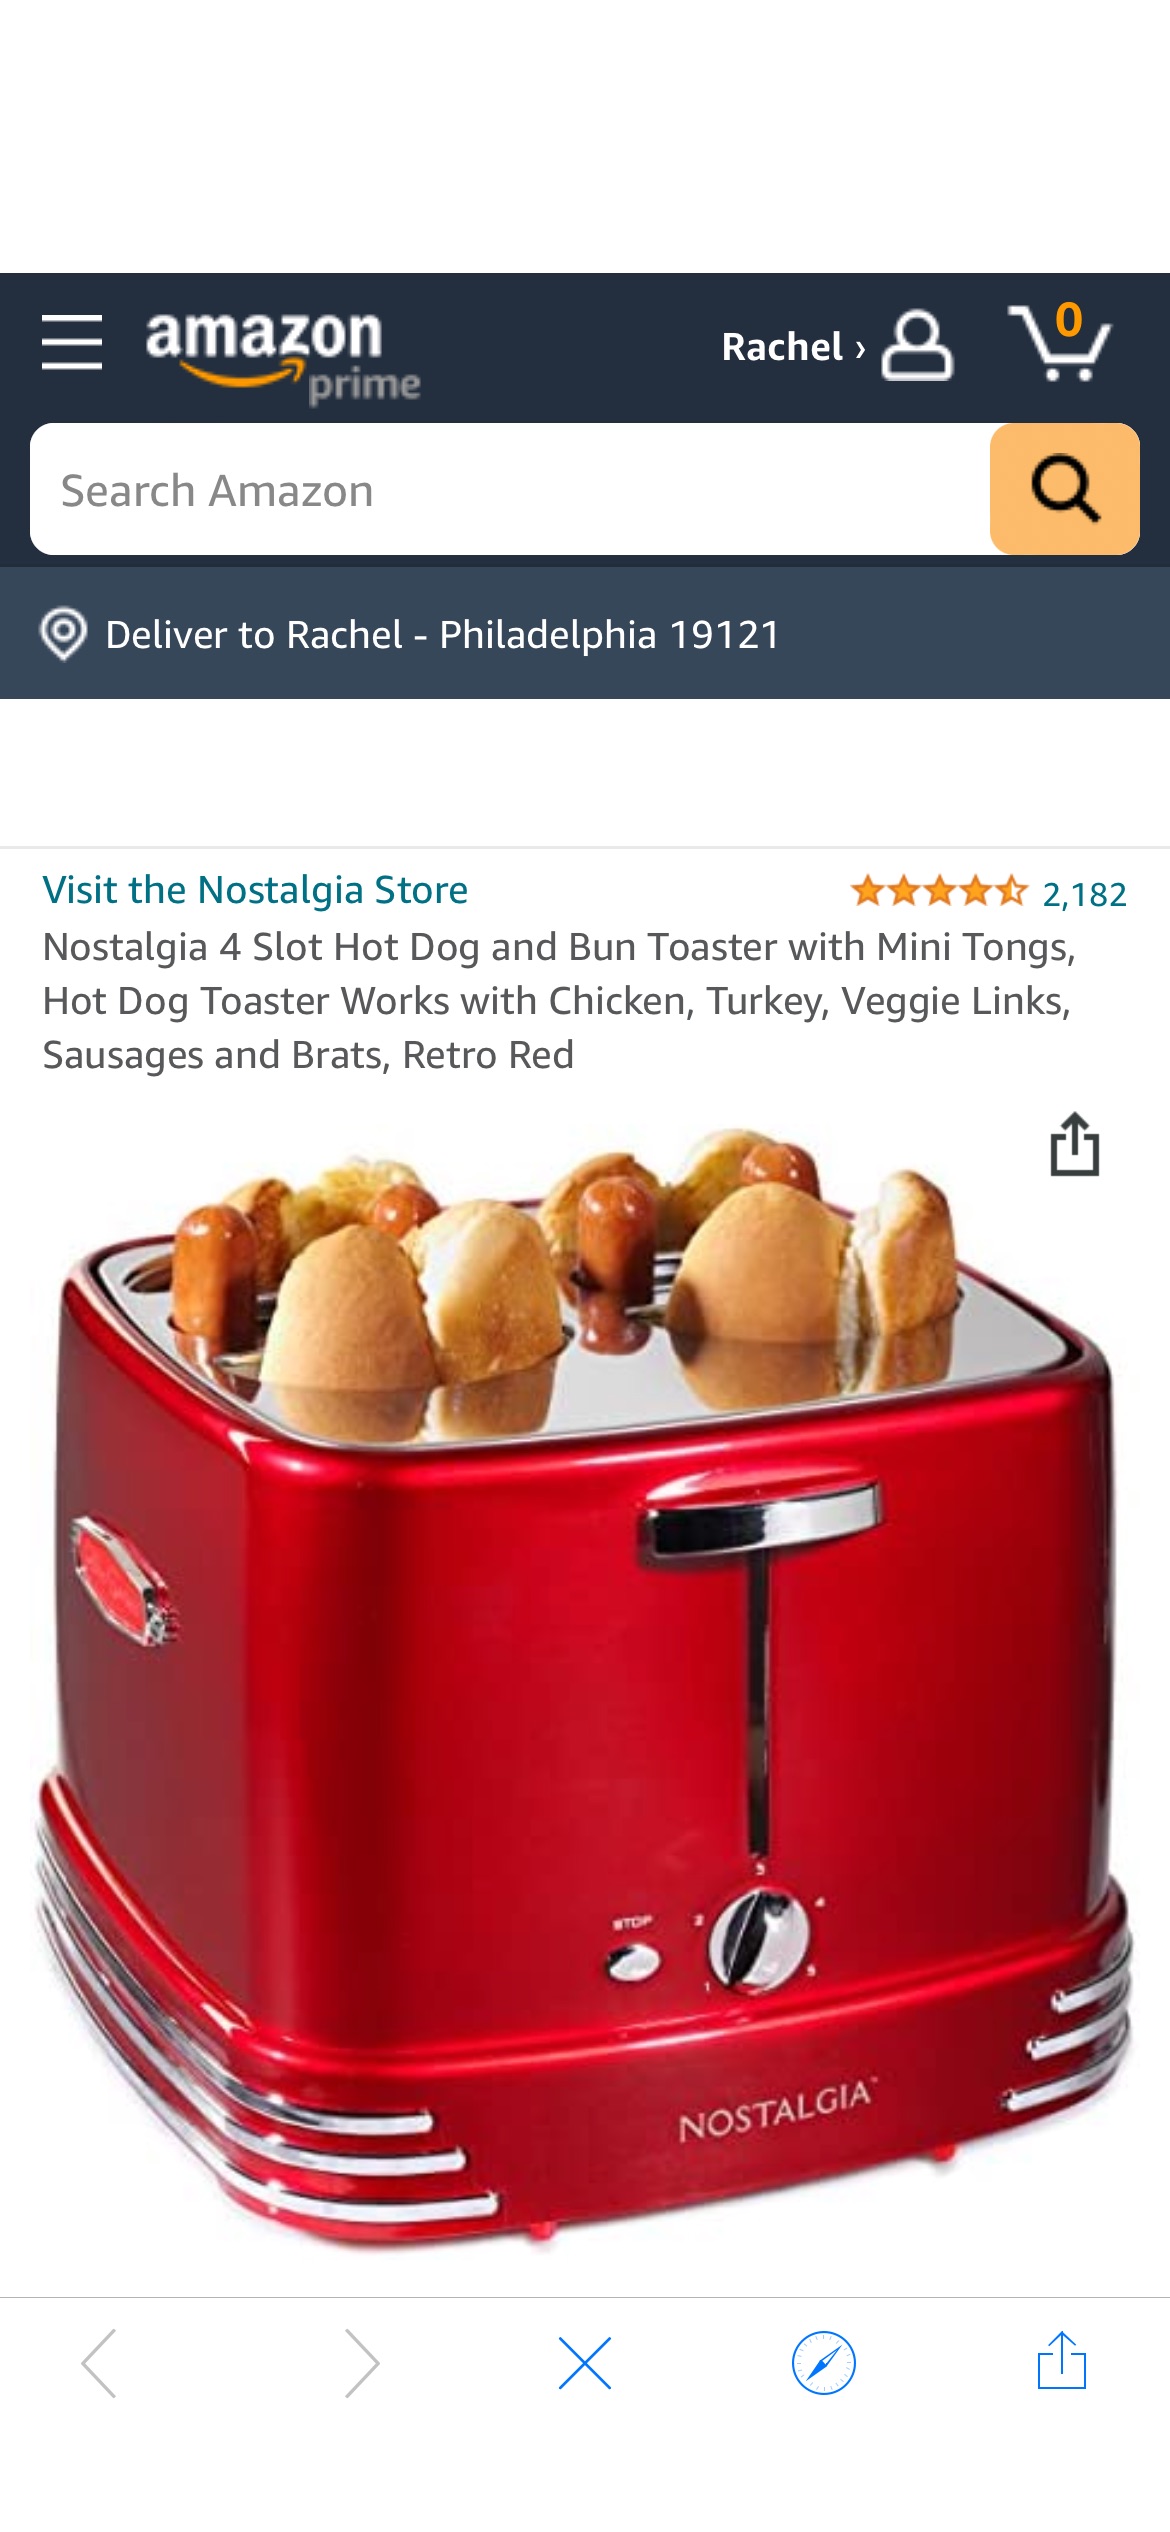 Amazon.com: Nostalgia 4 Slot Hot Dog and Bun Toaster with Mini Tongs, Hot Dog Toaster Works with Chicken, Turkey, Veggie Links, Sausages and Brats, Retro Red